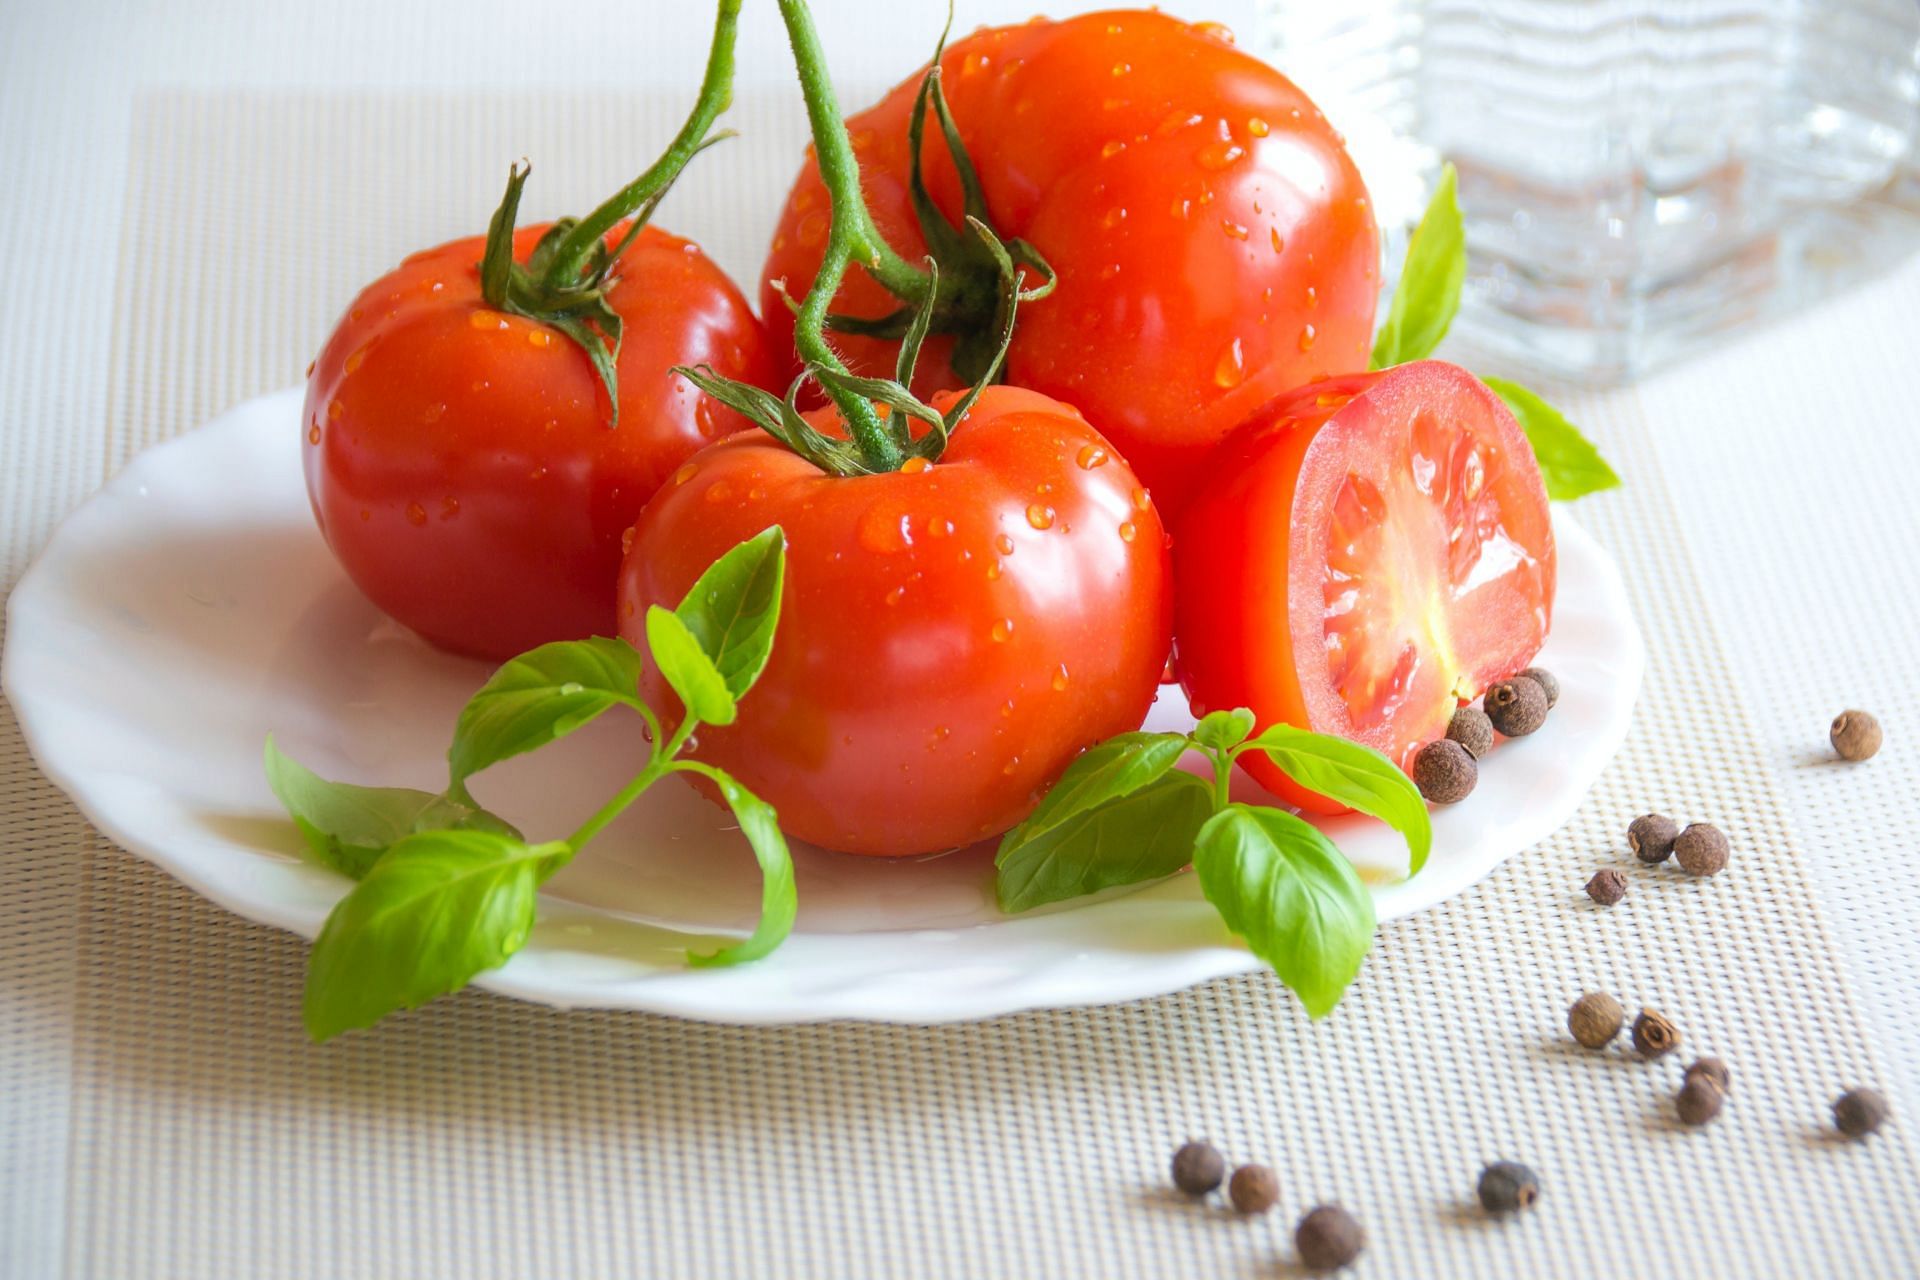 Benefits of tomatoes for skin (image sourced via Pexels / Photo by Photomix)